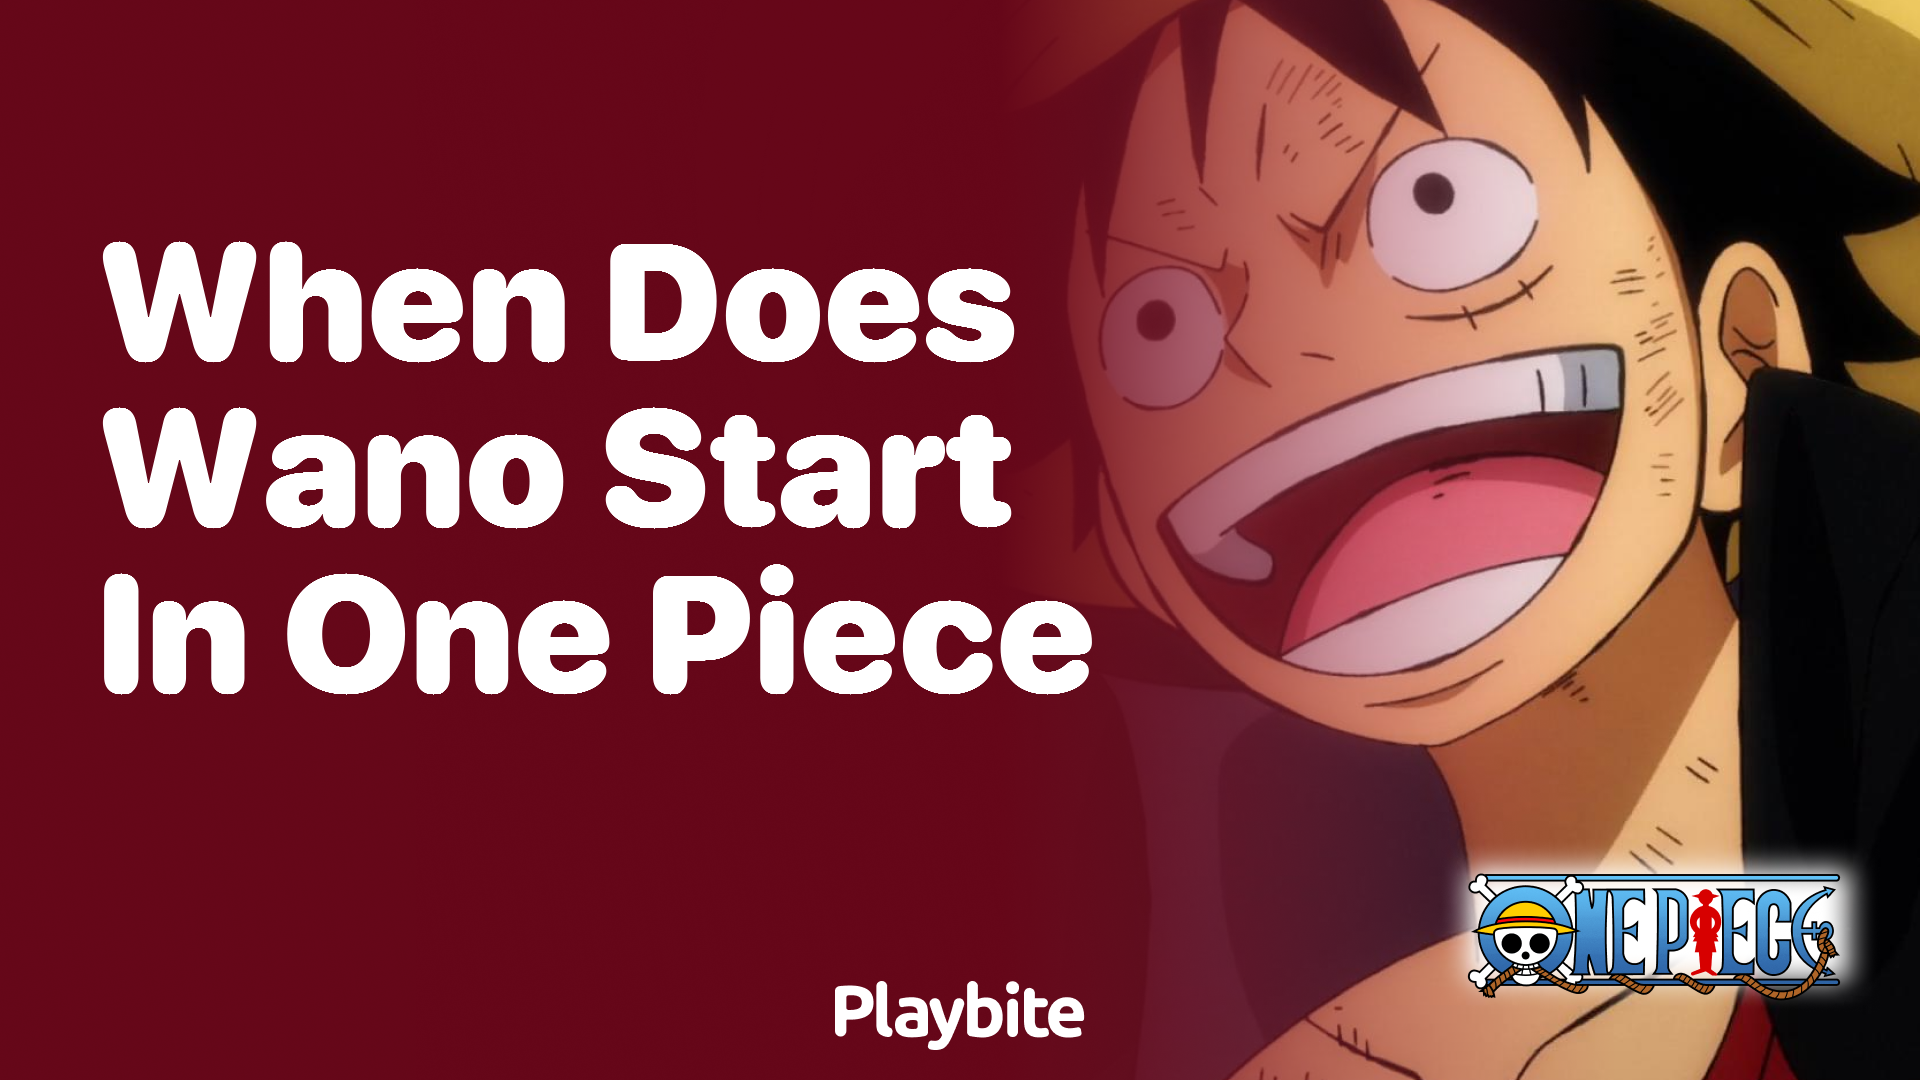 When does the Wano arc start in One Piece?